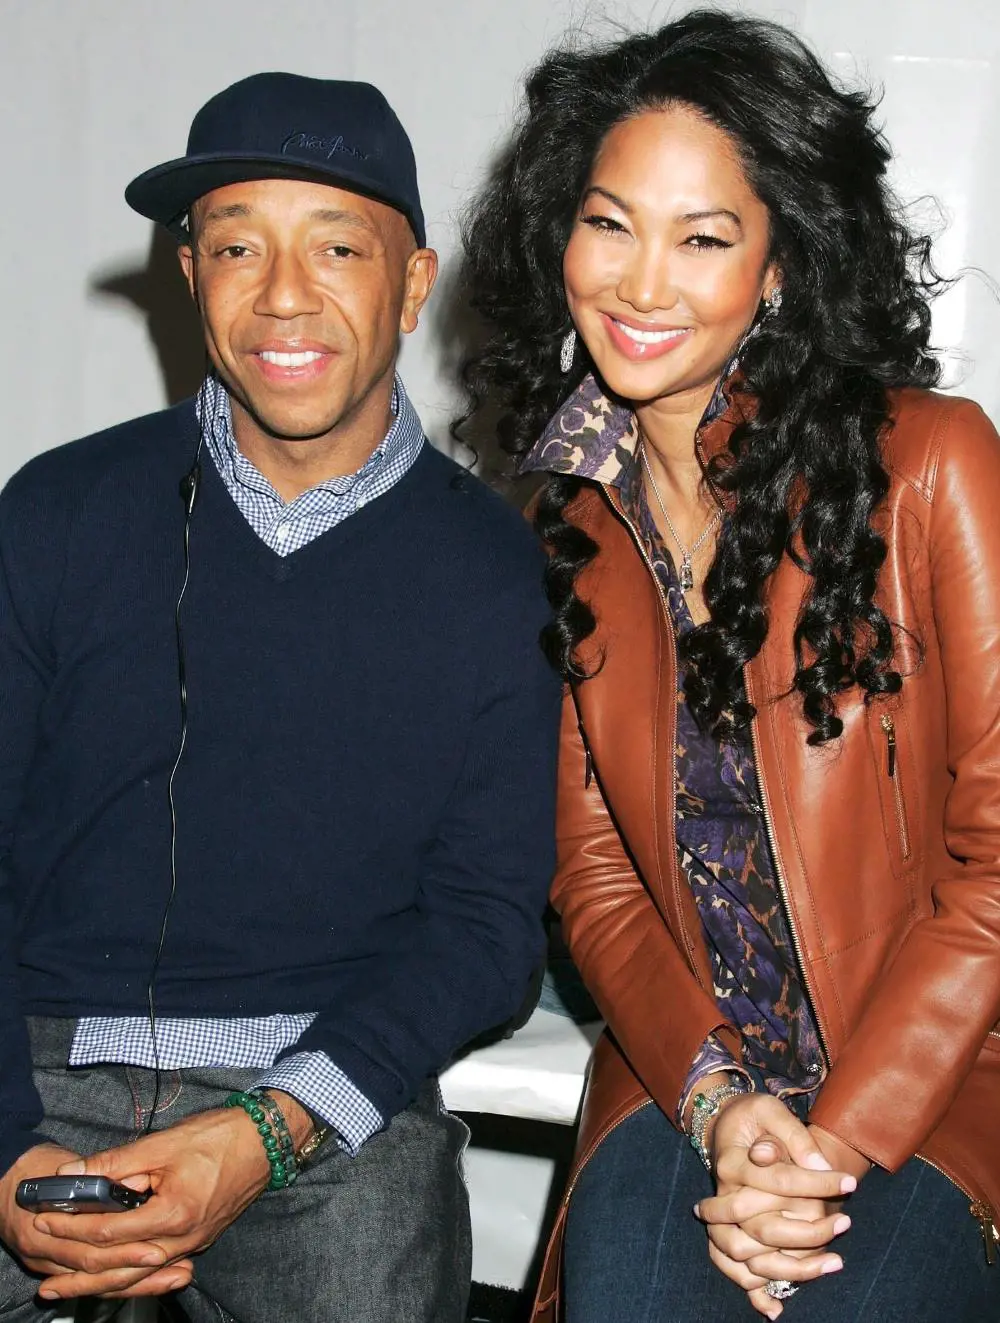 Music mogul Russell Simmons was 35 and model Kimora Lee Simmons was 17 when they started dating